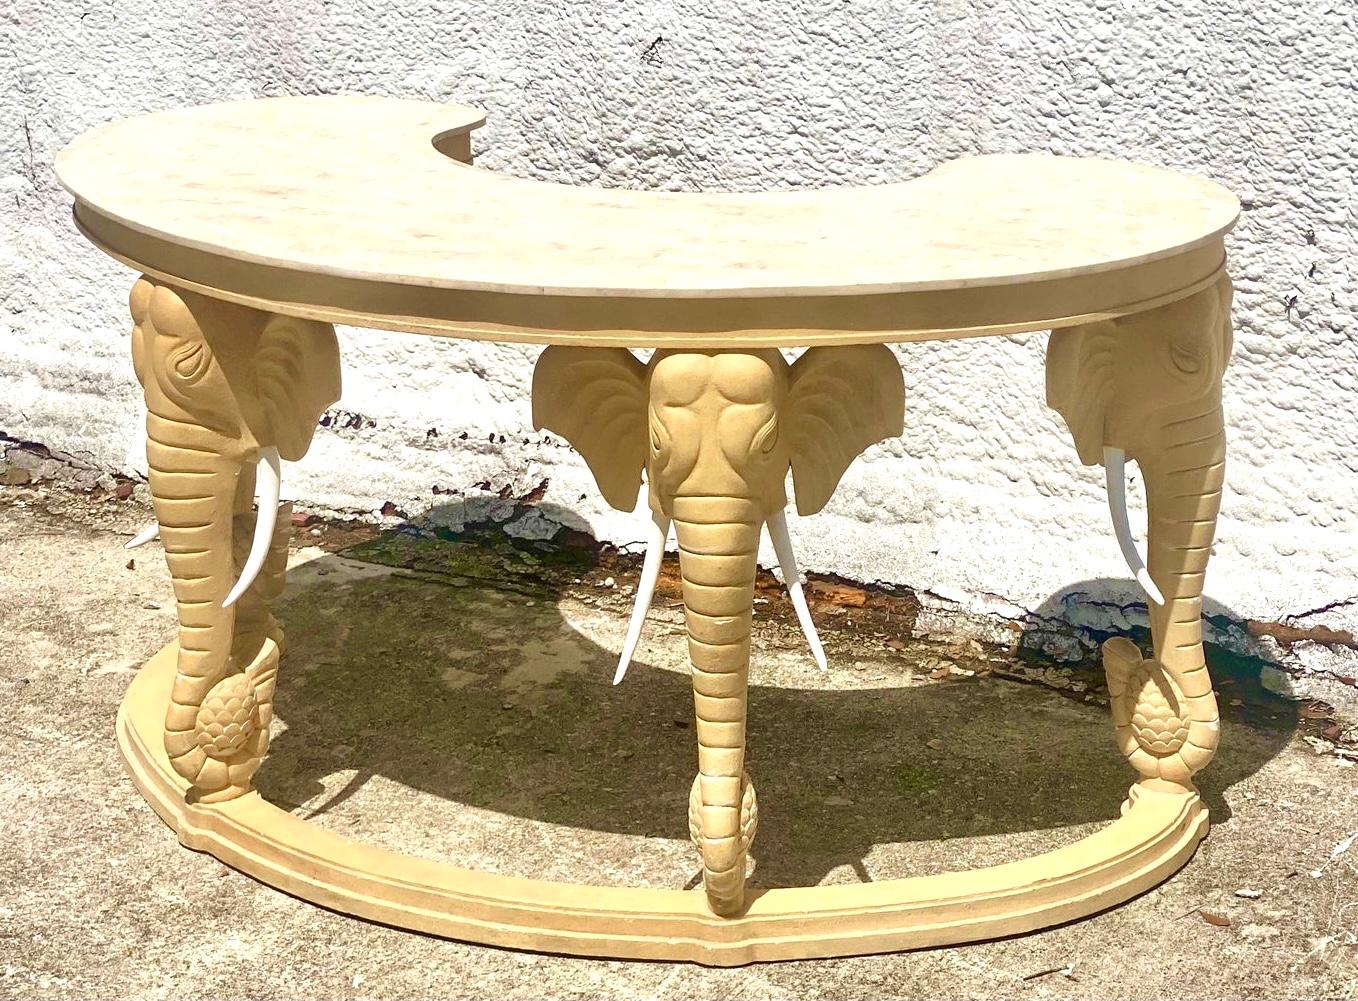 Late 20th Century Regency Tessellated Stone Curved Elephant Desk and Matching Chair